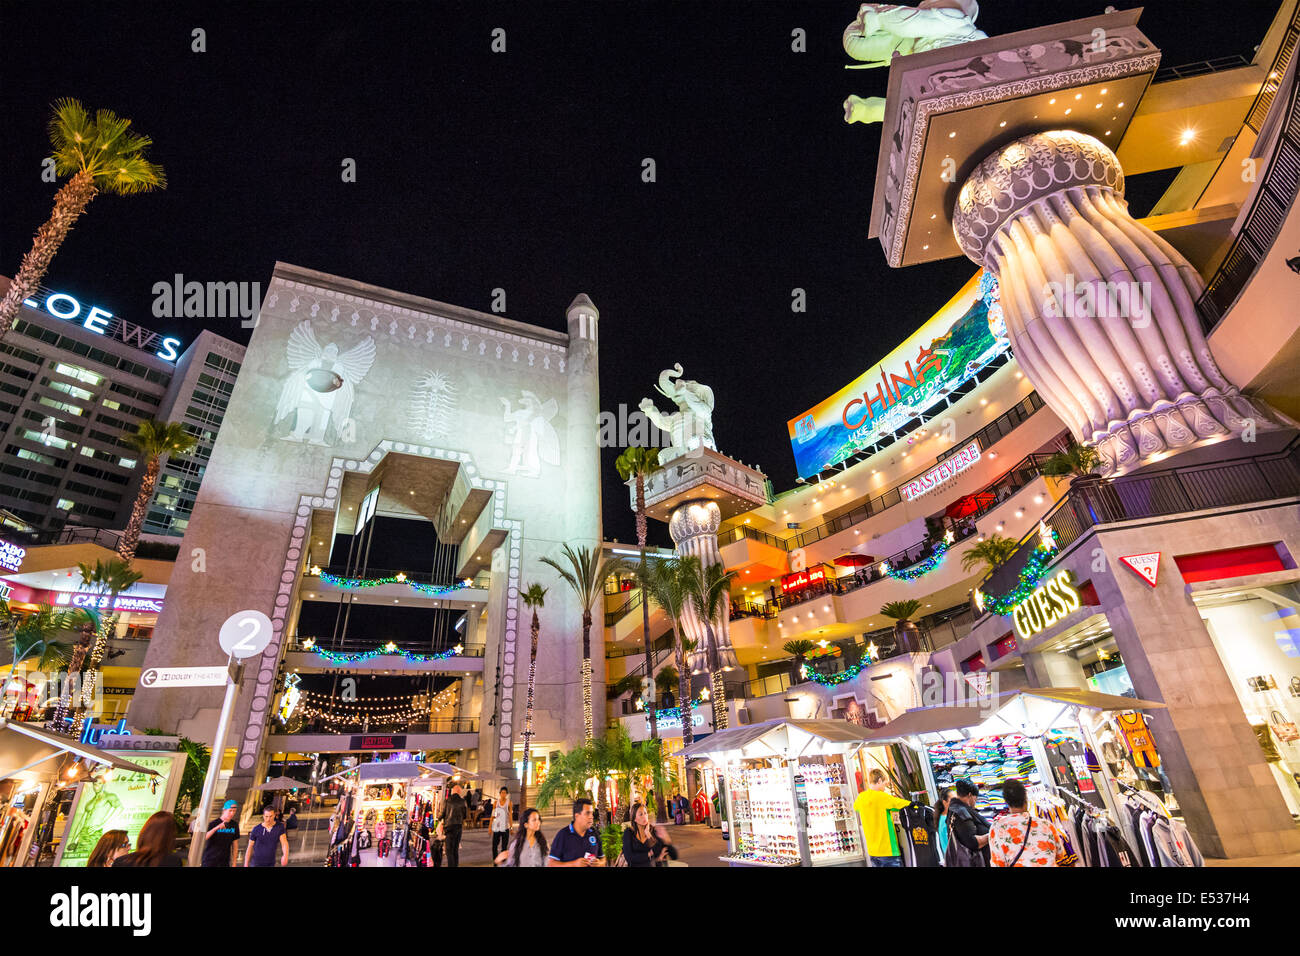 Hollywood and Highland complex at night in Hollywood, California. Stock Photo